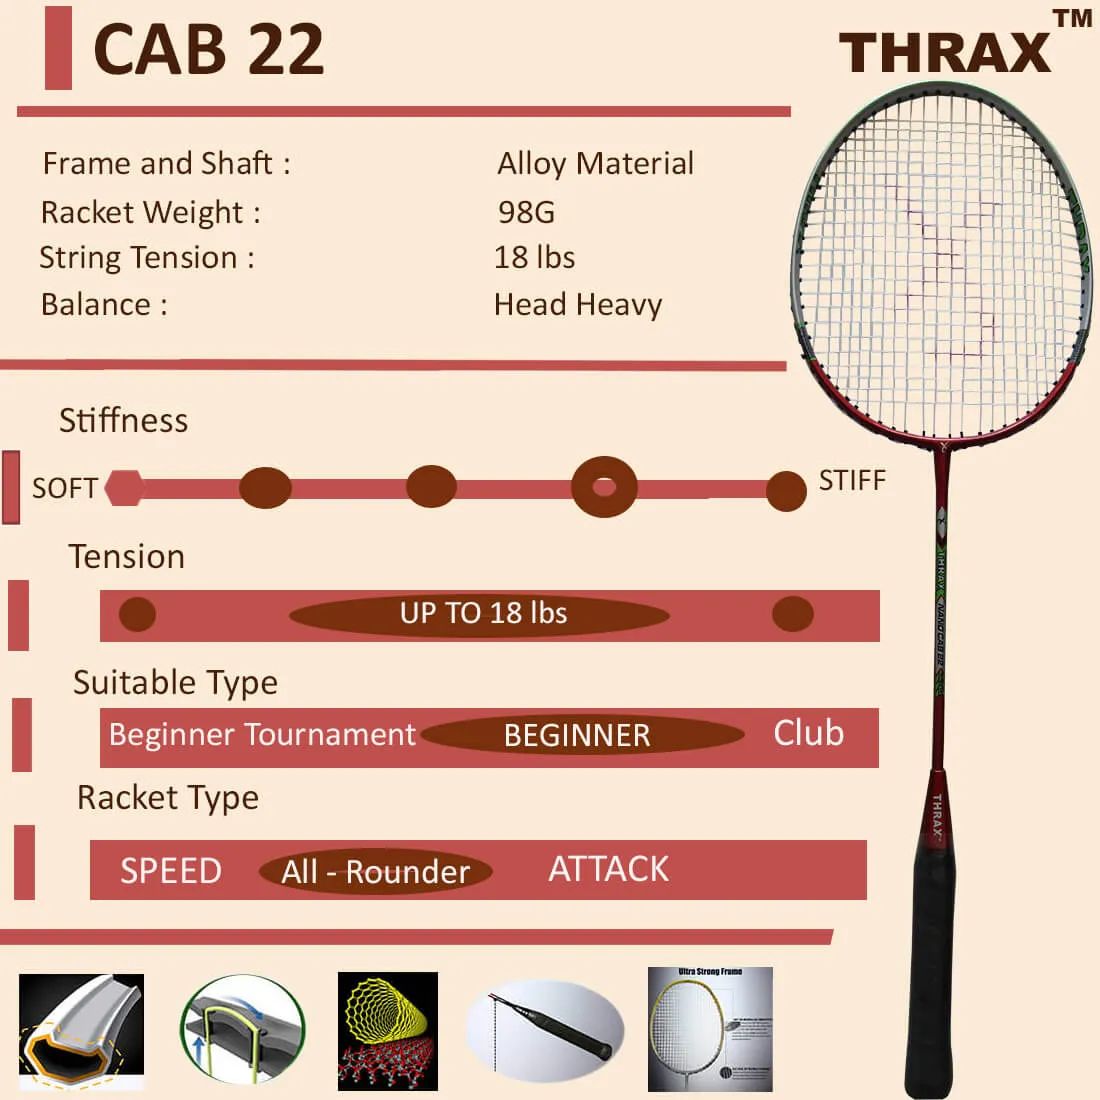 Thrax_CAB_22_Badminton_Racket_Technical_Specification_Red